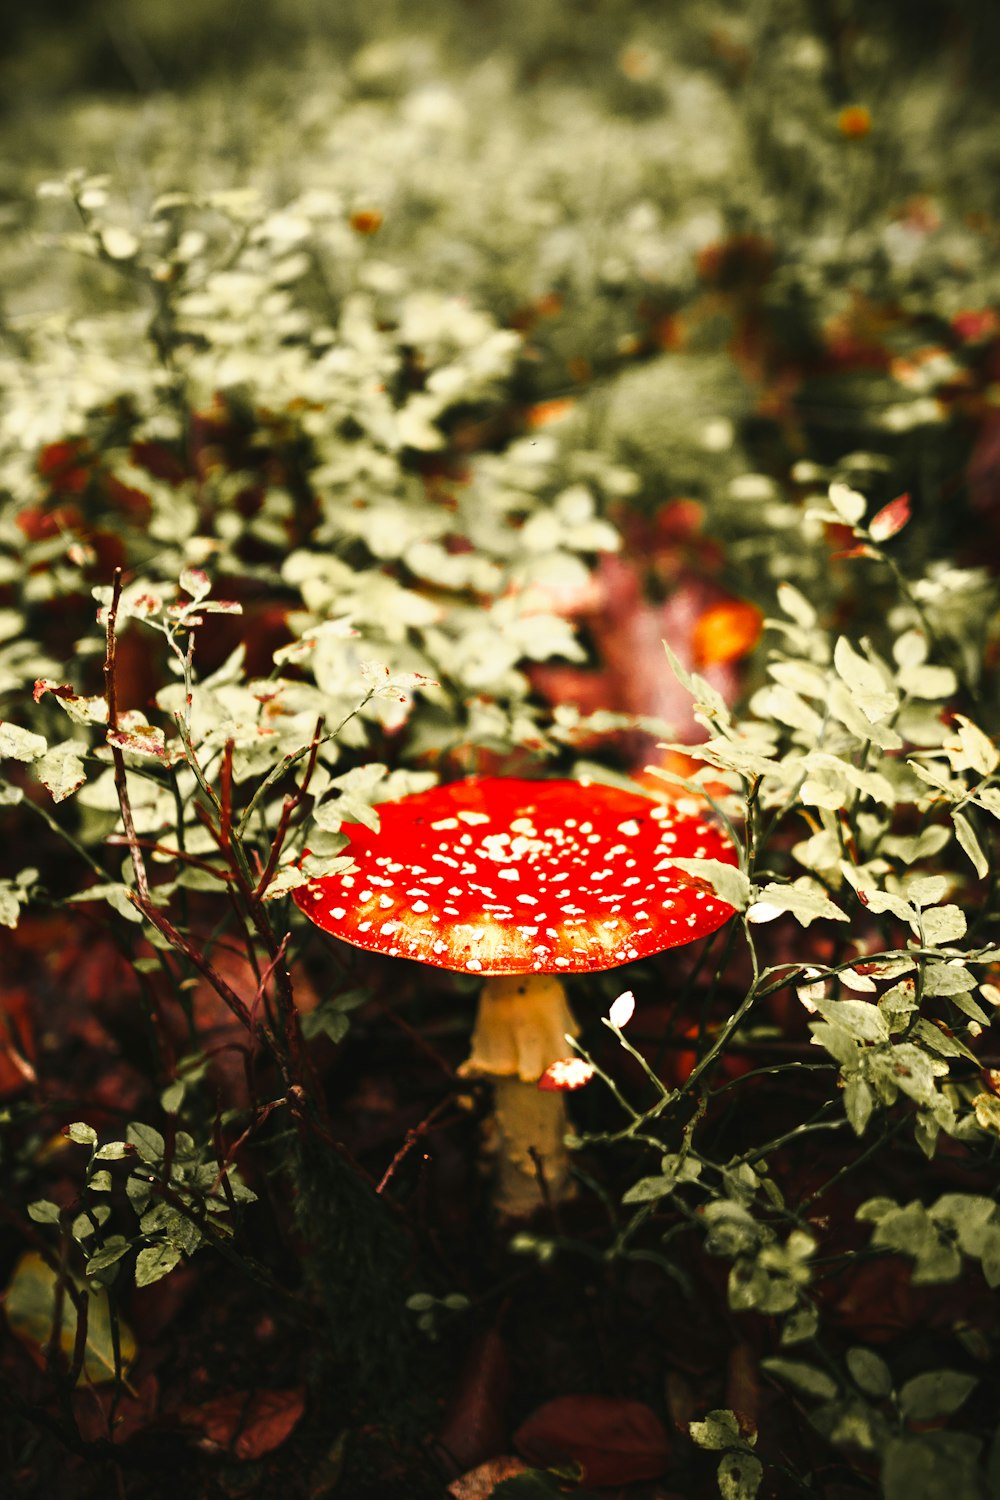 red and white mushroom near green plants